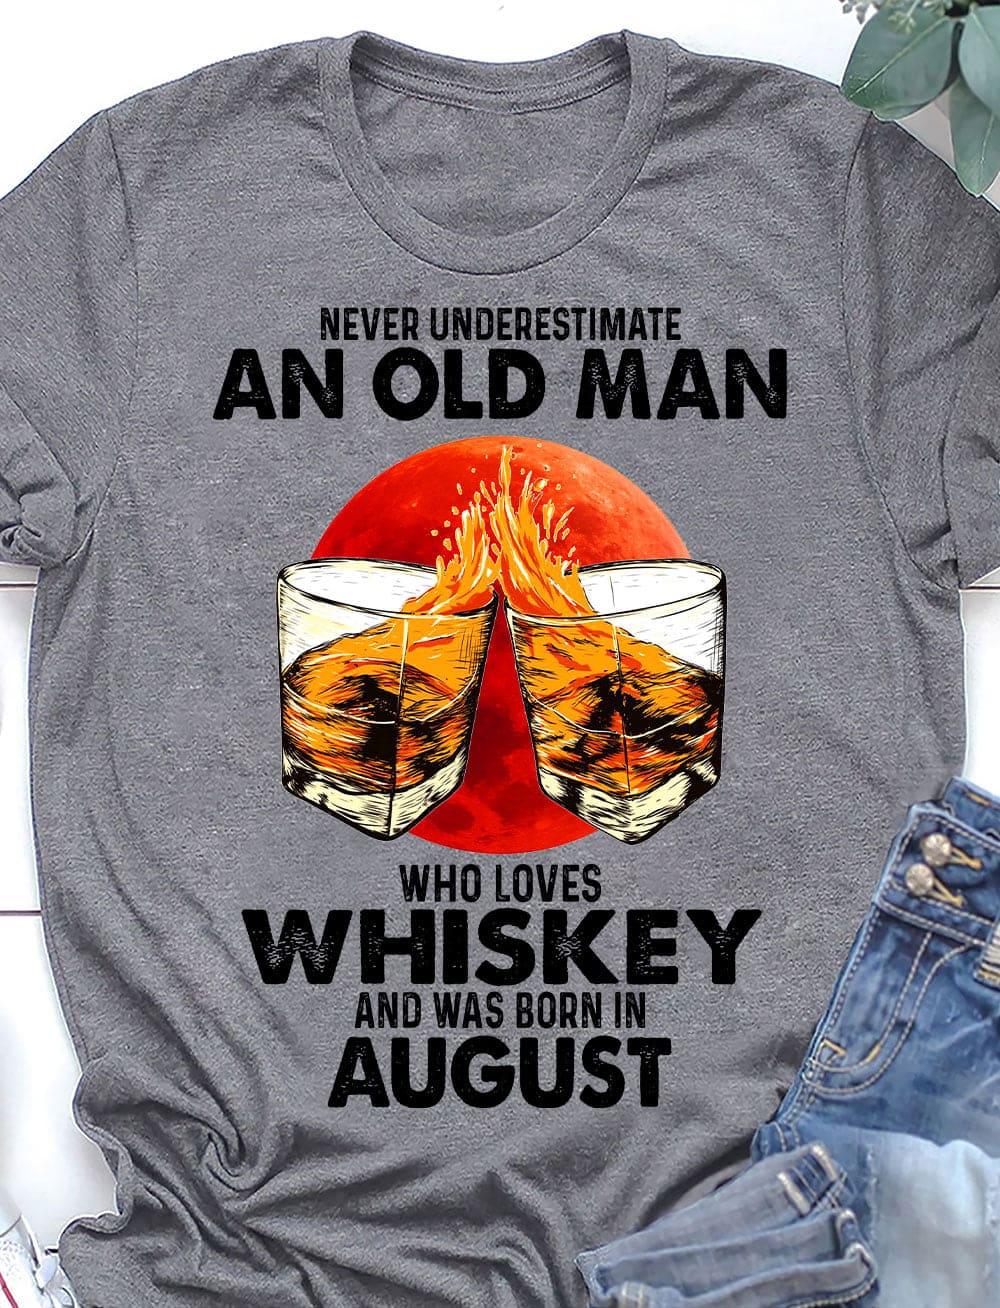 Never underestimate an old man who loves Whiskey and was born in August - August whiskey drinker